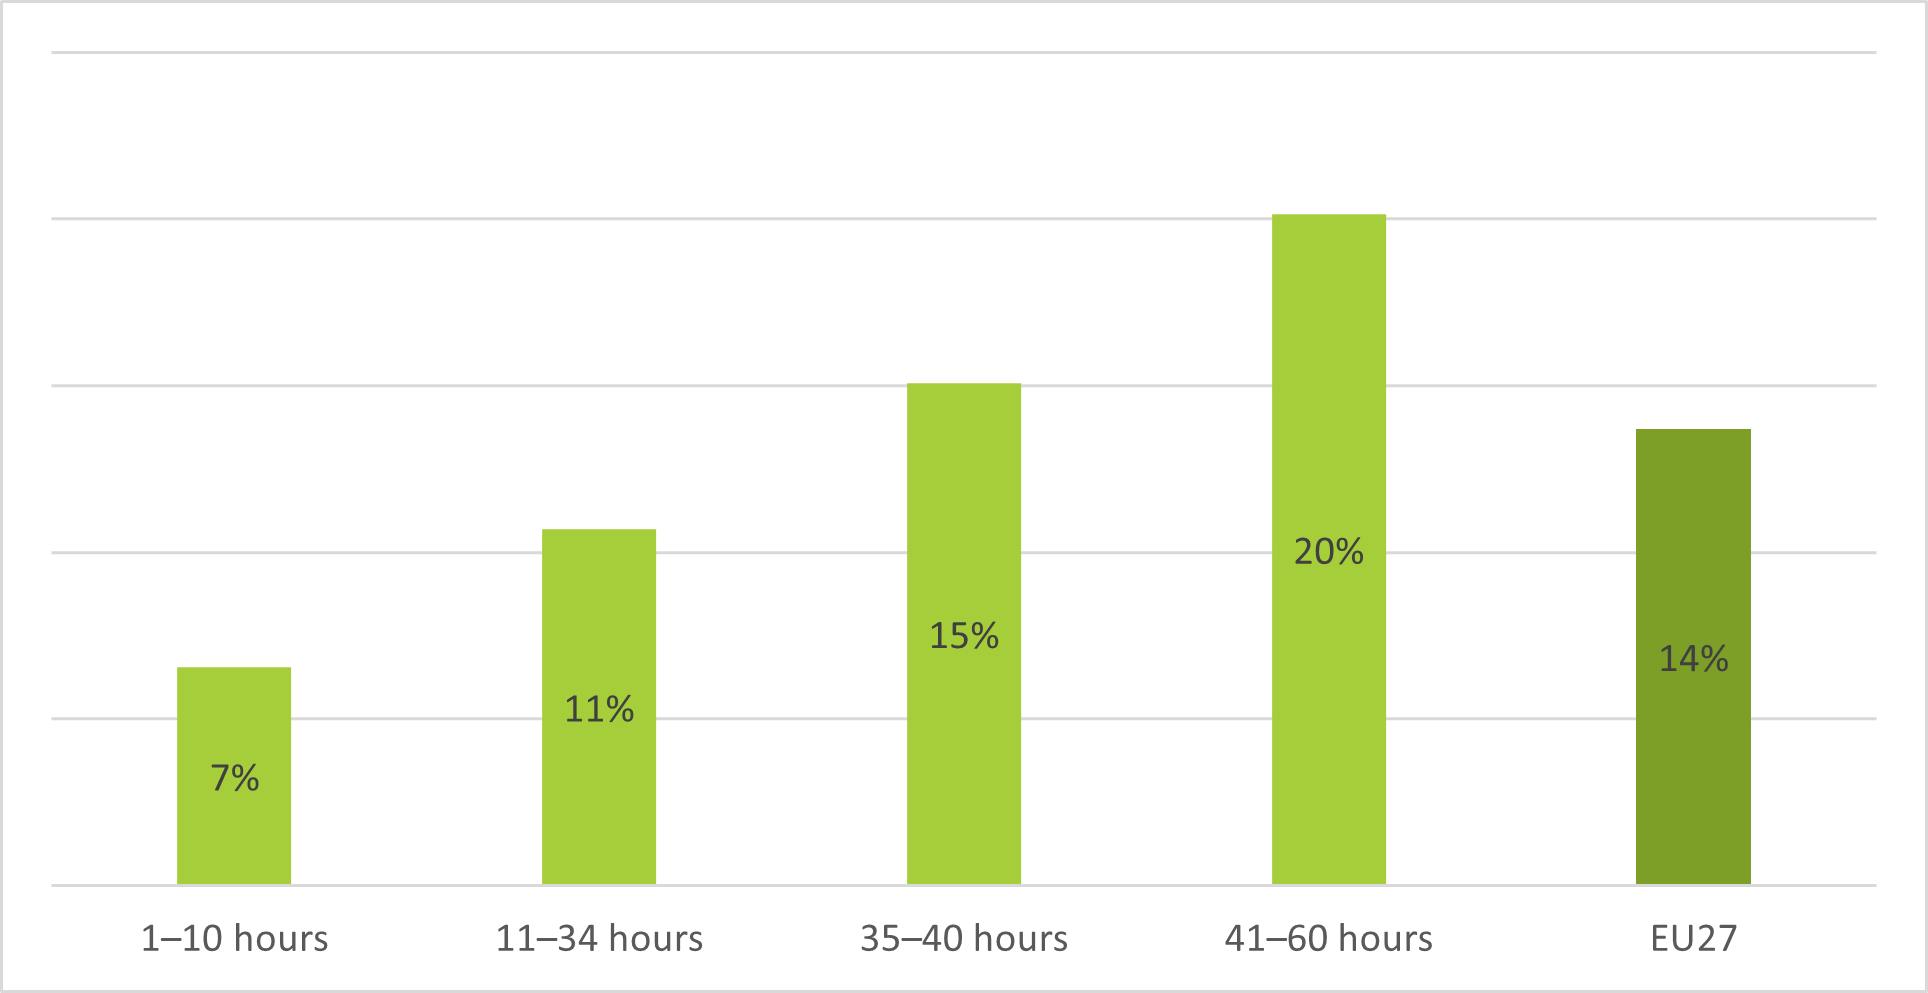 Figure 6: Percentage of full-time employees feeling isolated at work, by hours worked from home, EU27, July 2020